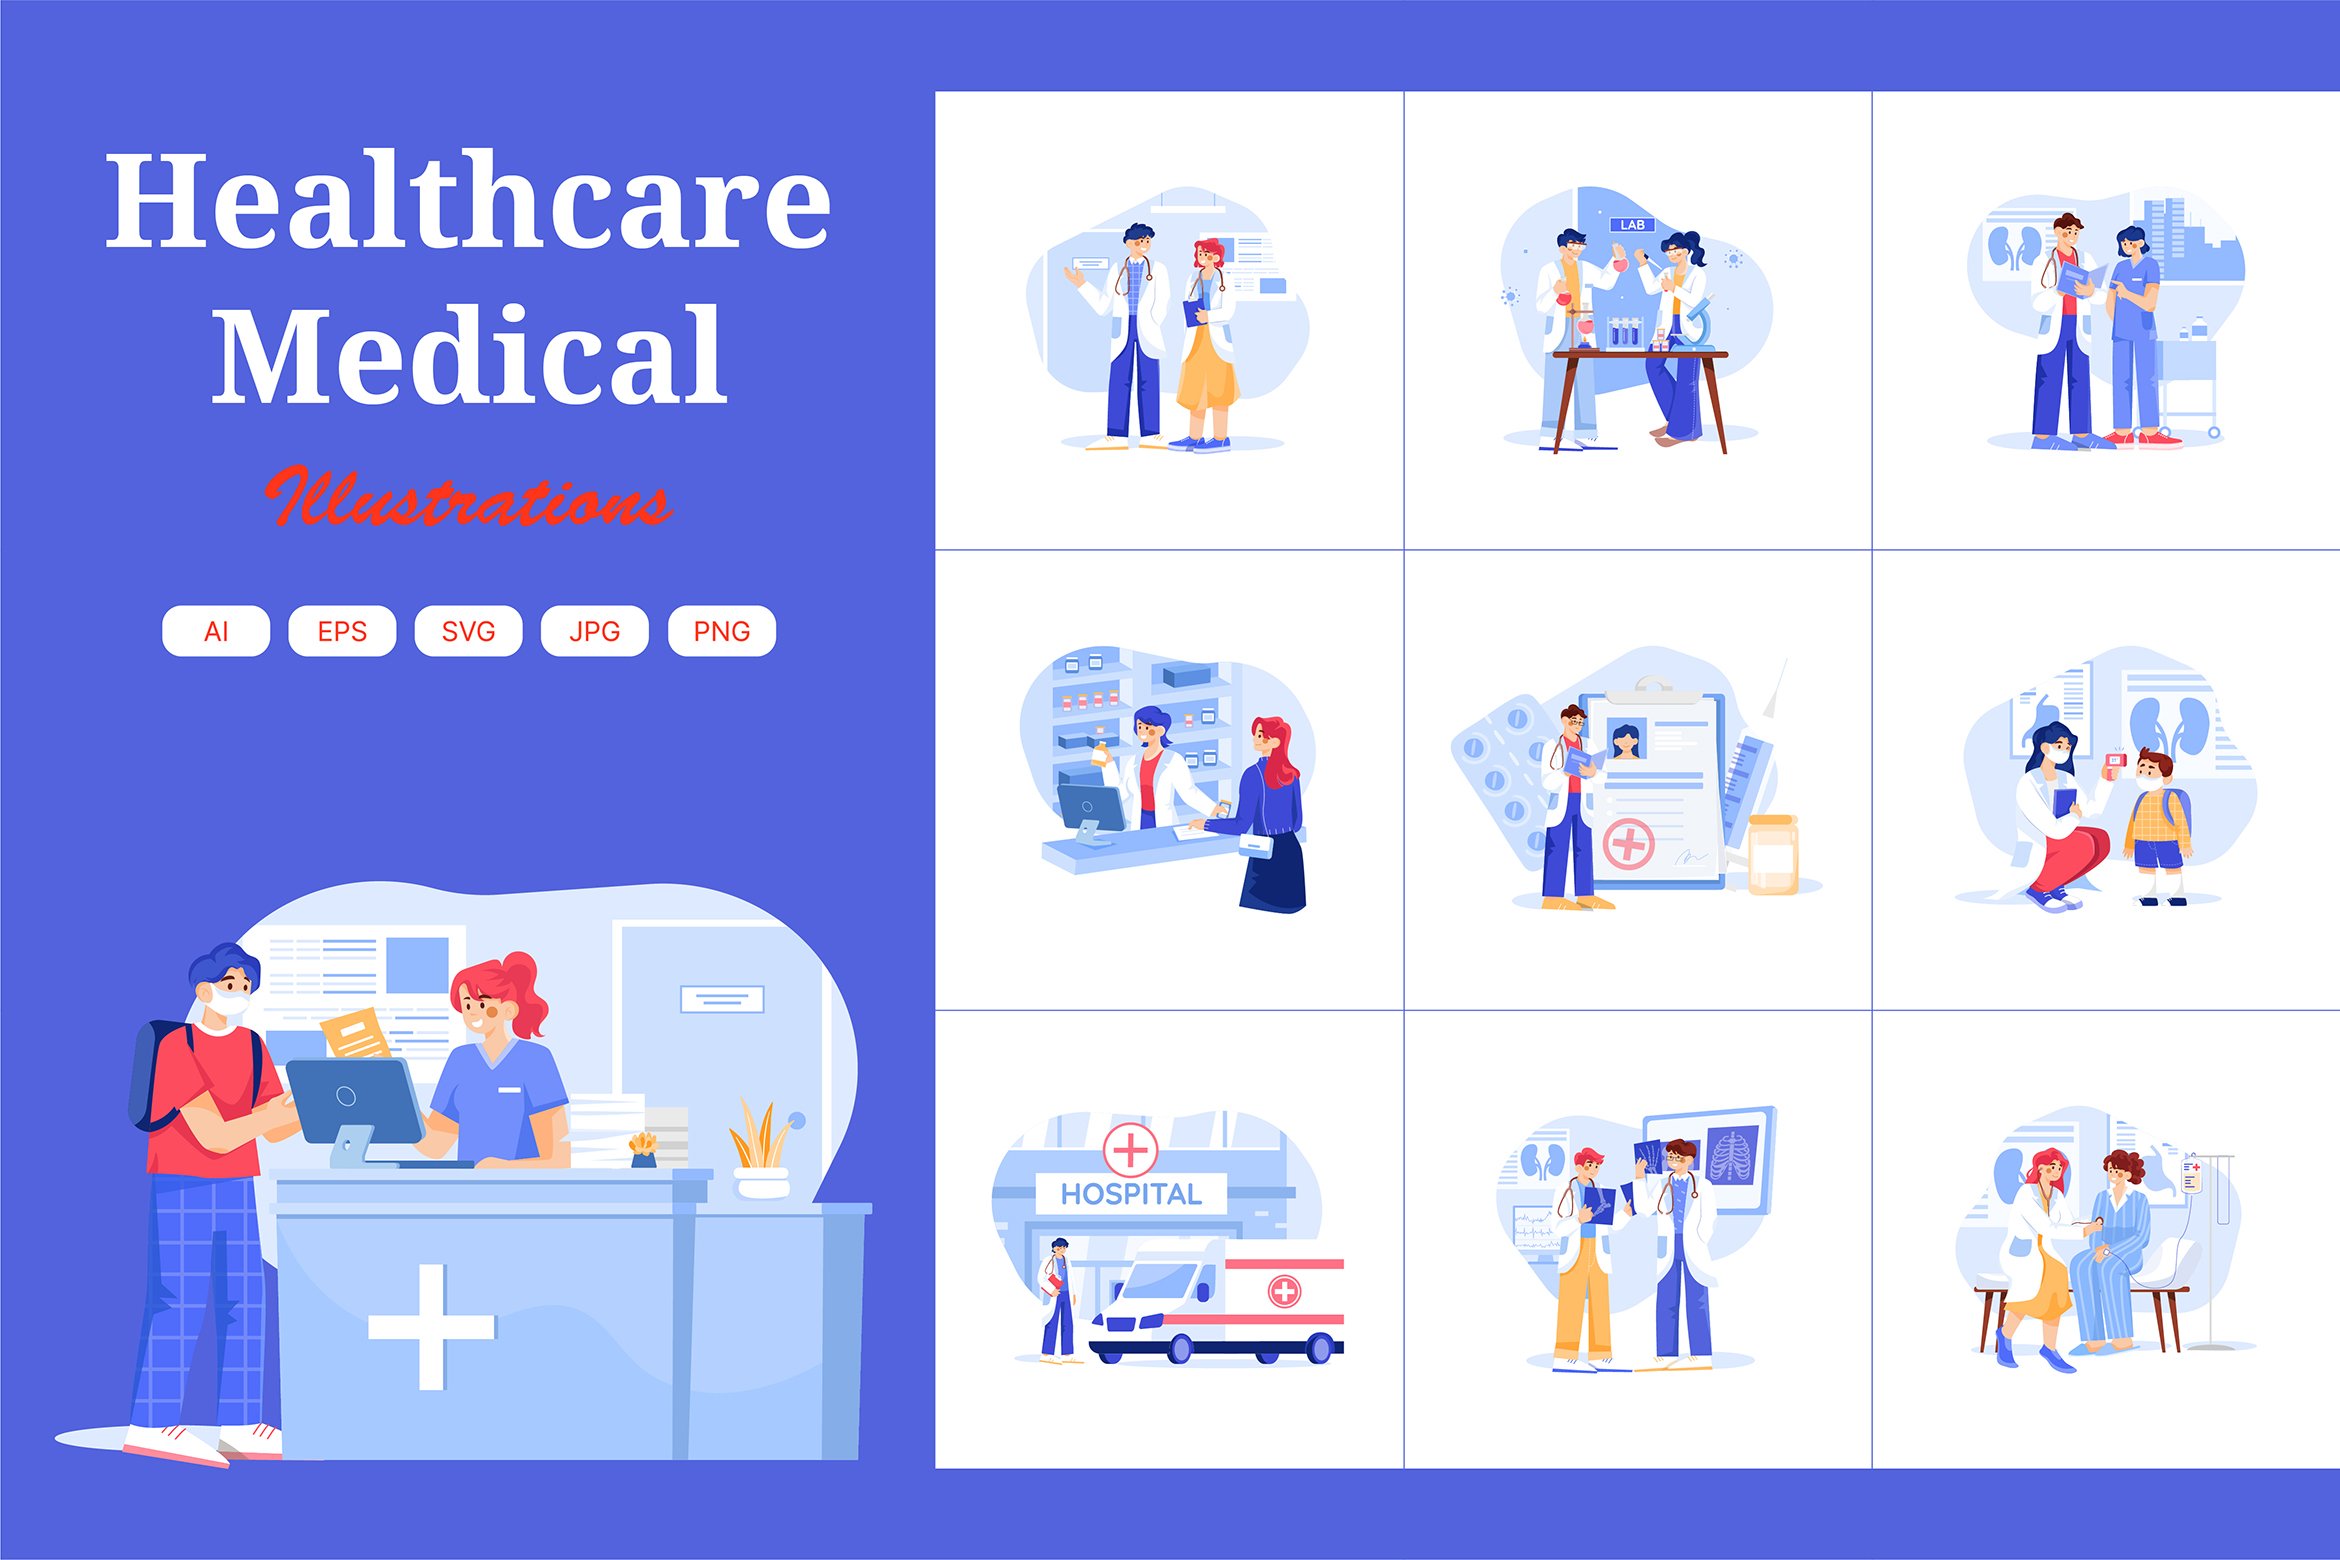 M443_Healthcare Illustrations cover image.